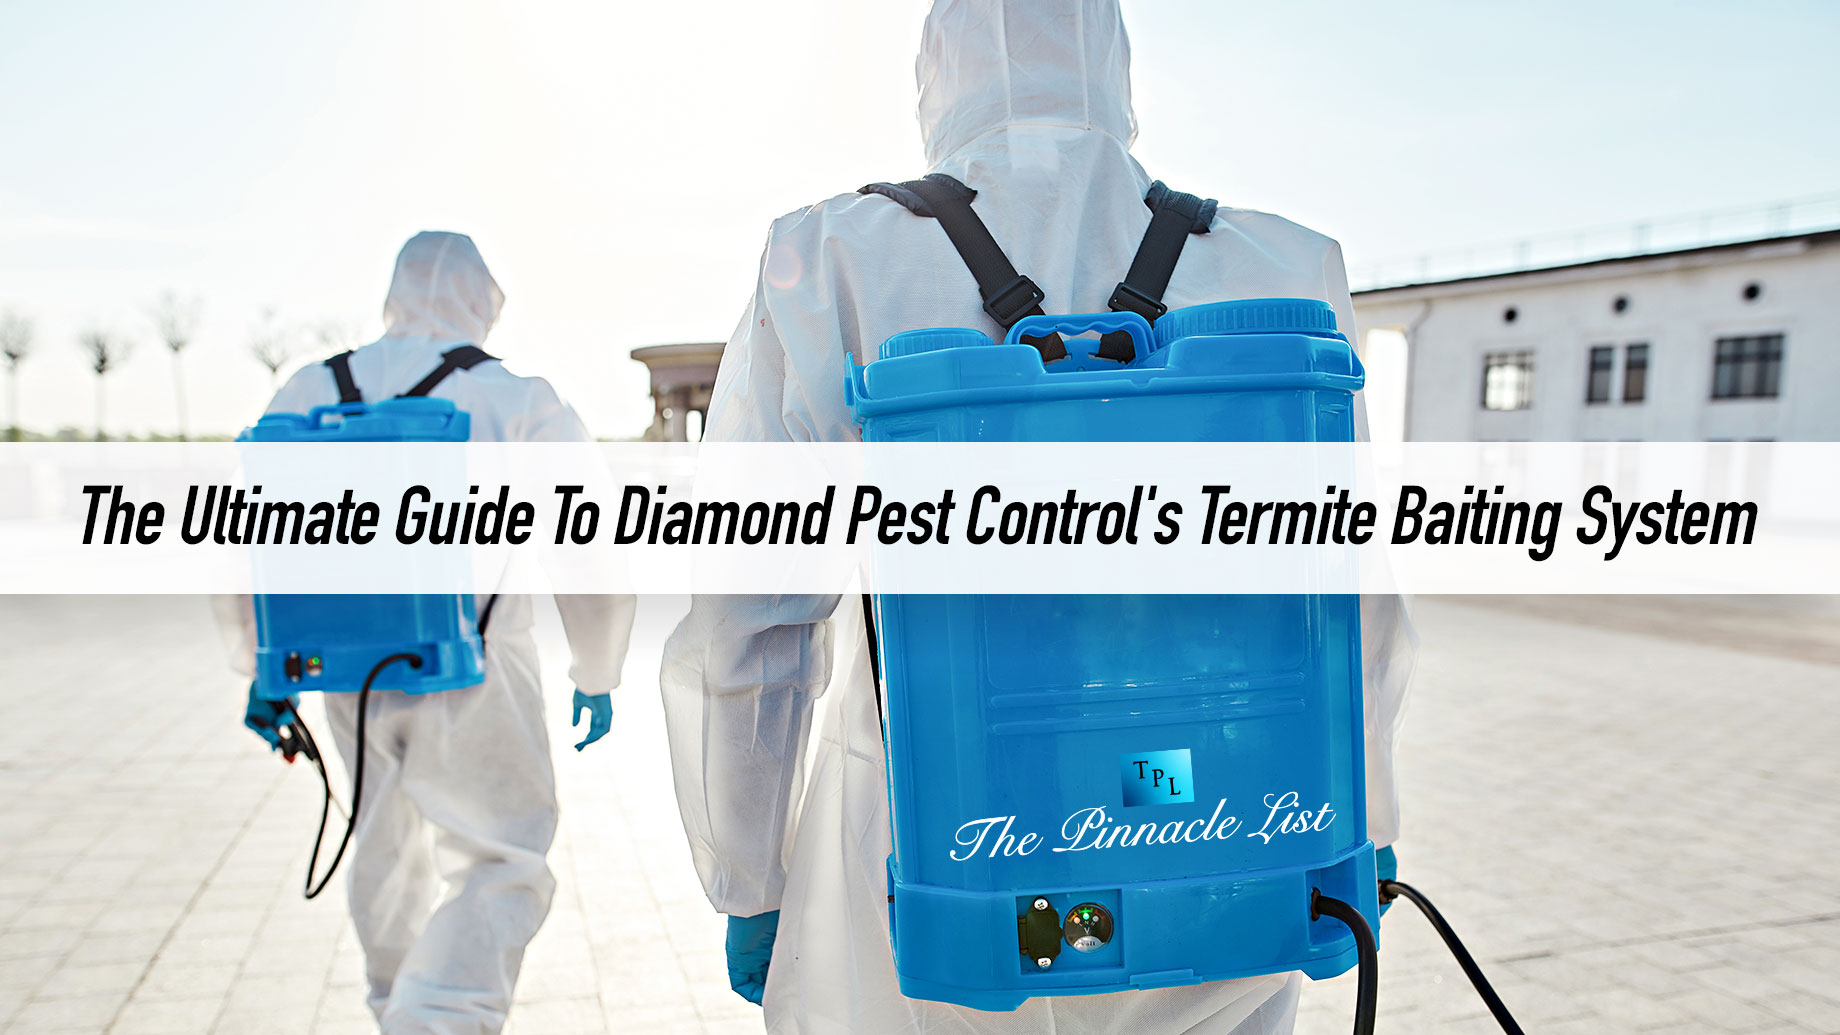 The Ultimate Guide To Diamond Pest Control's Termite Baiting System